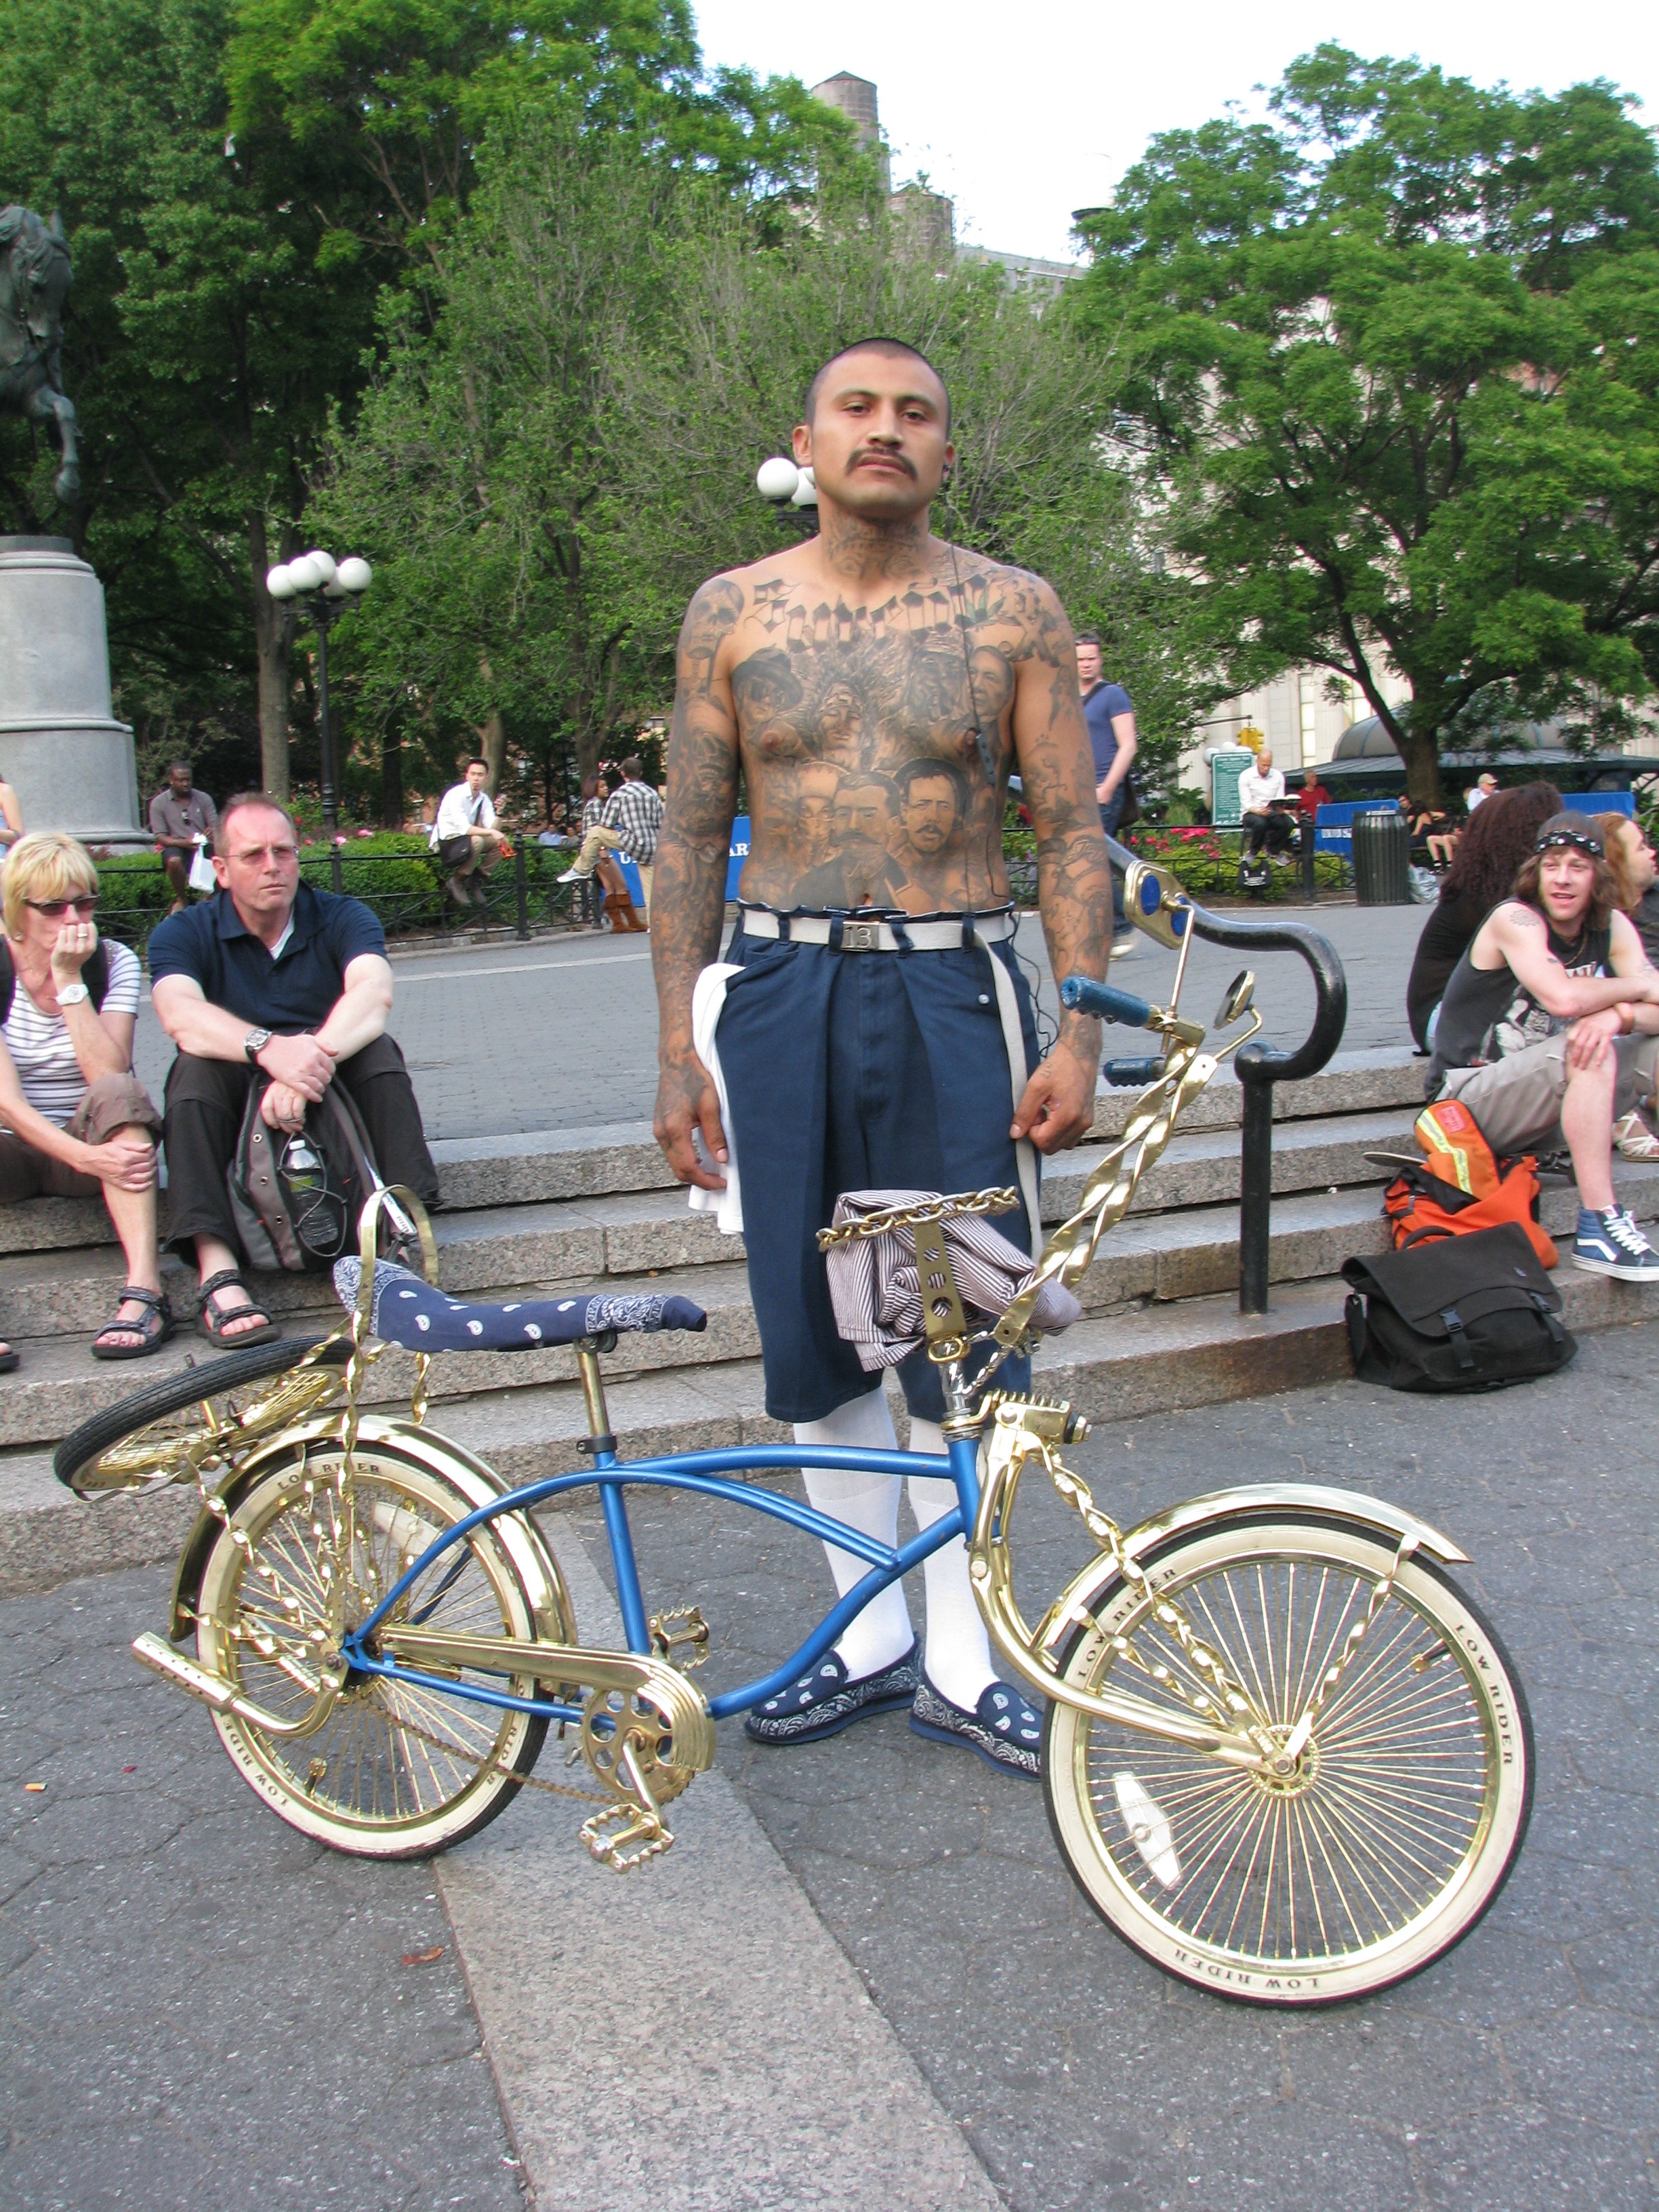 Cholo with lowrider bicycle